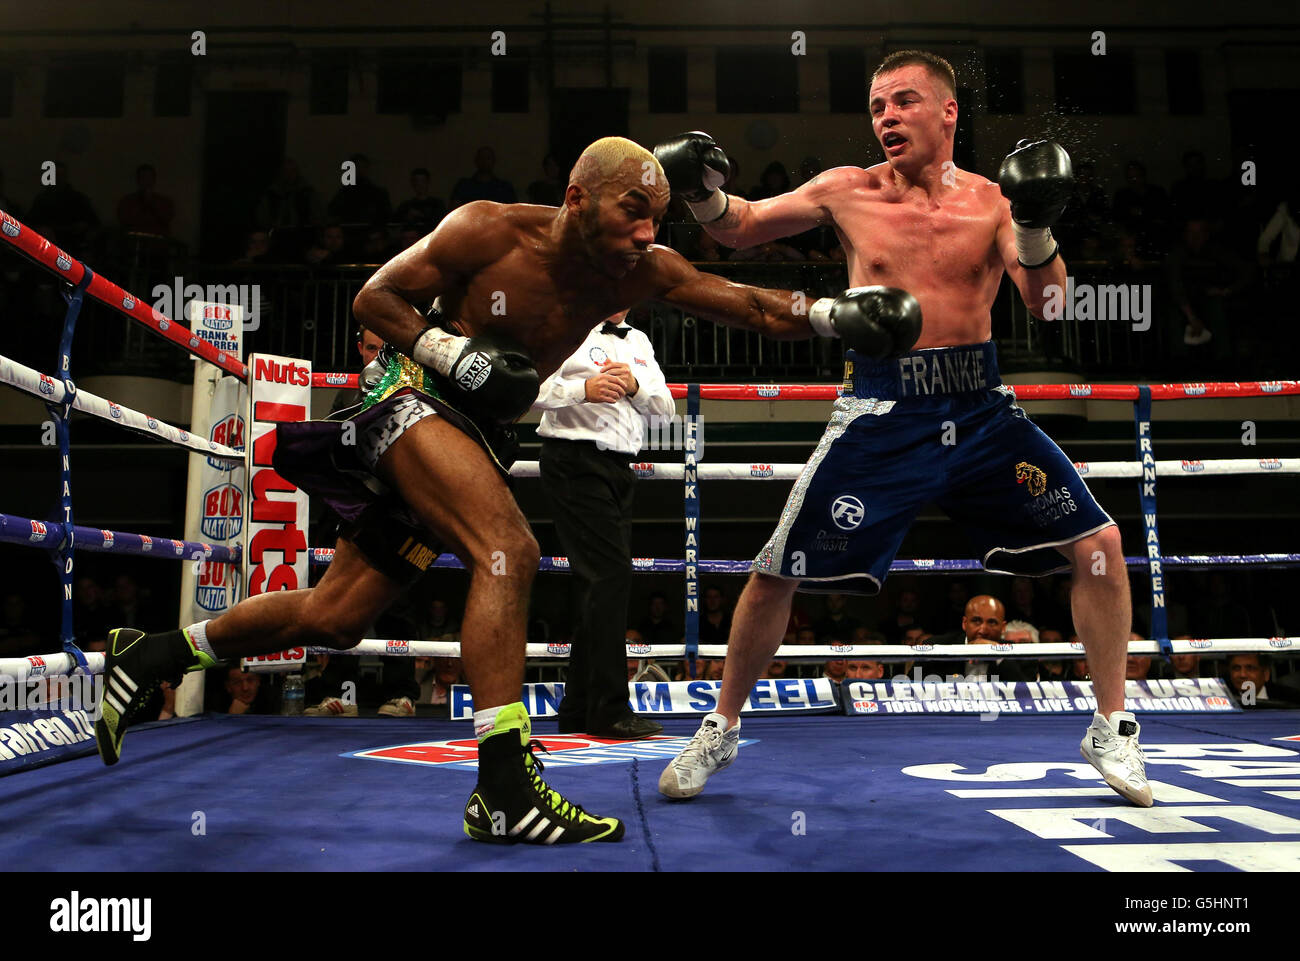 Junior Witter (left) in action against Frankie Gavin during there British Welterweight Title fight at York Hall, London. Stock Photo